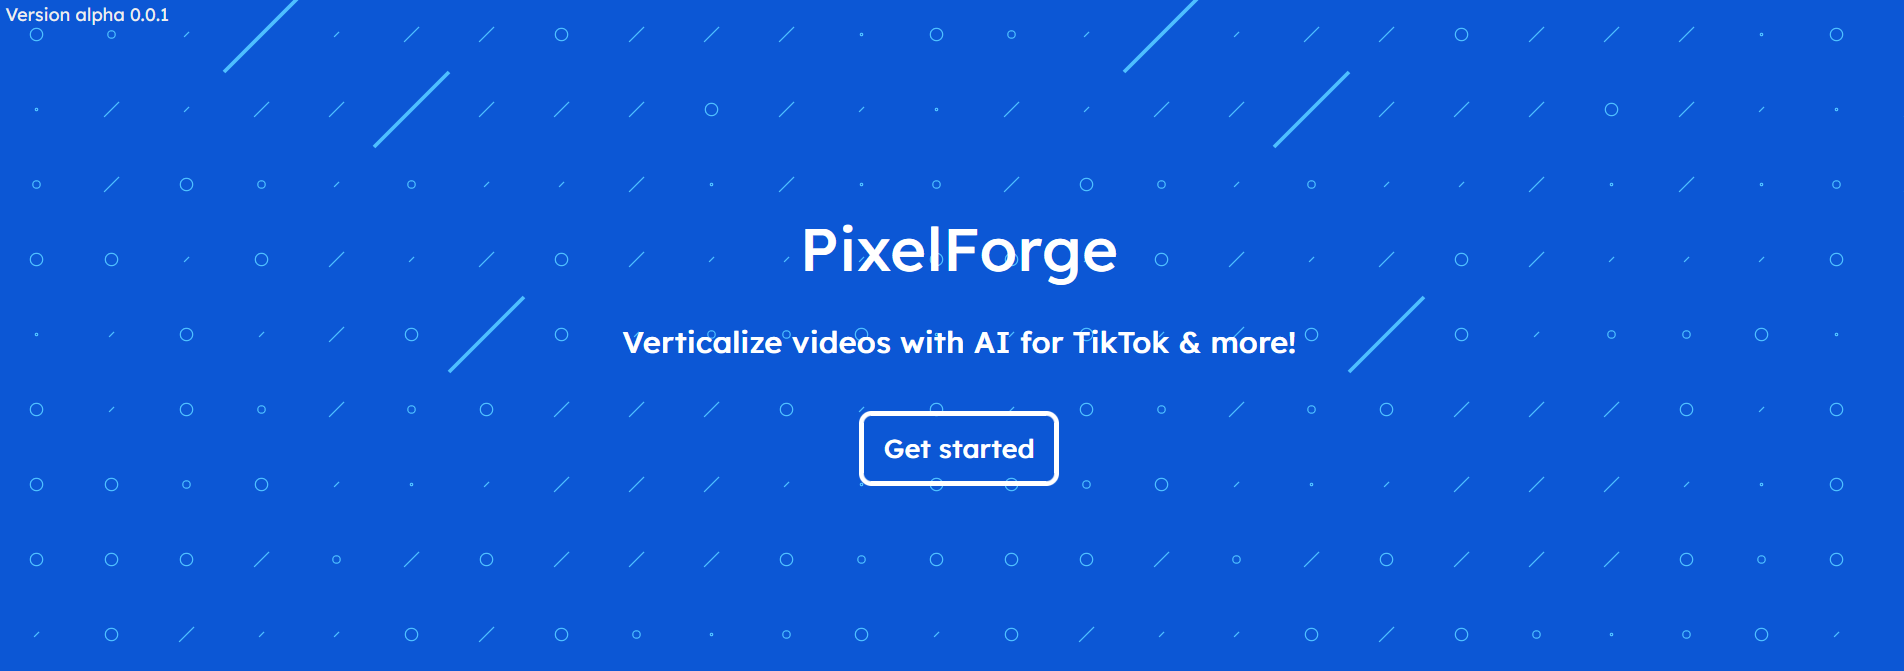 PixelForgeAn AI powered tool that converts videos into vertical format for